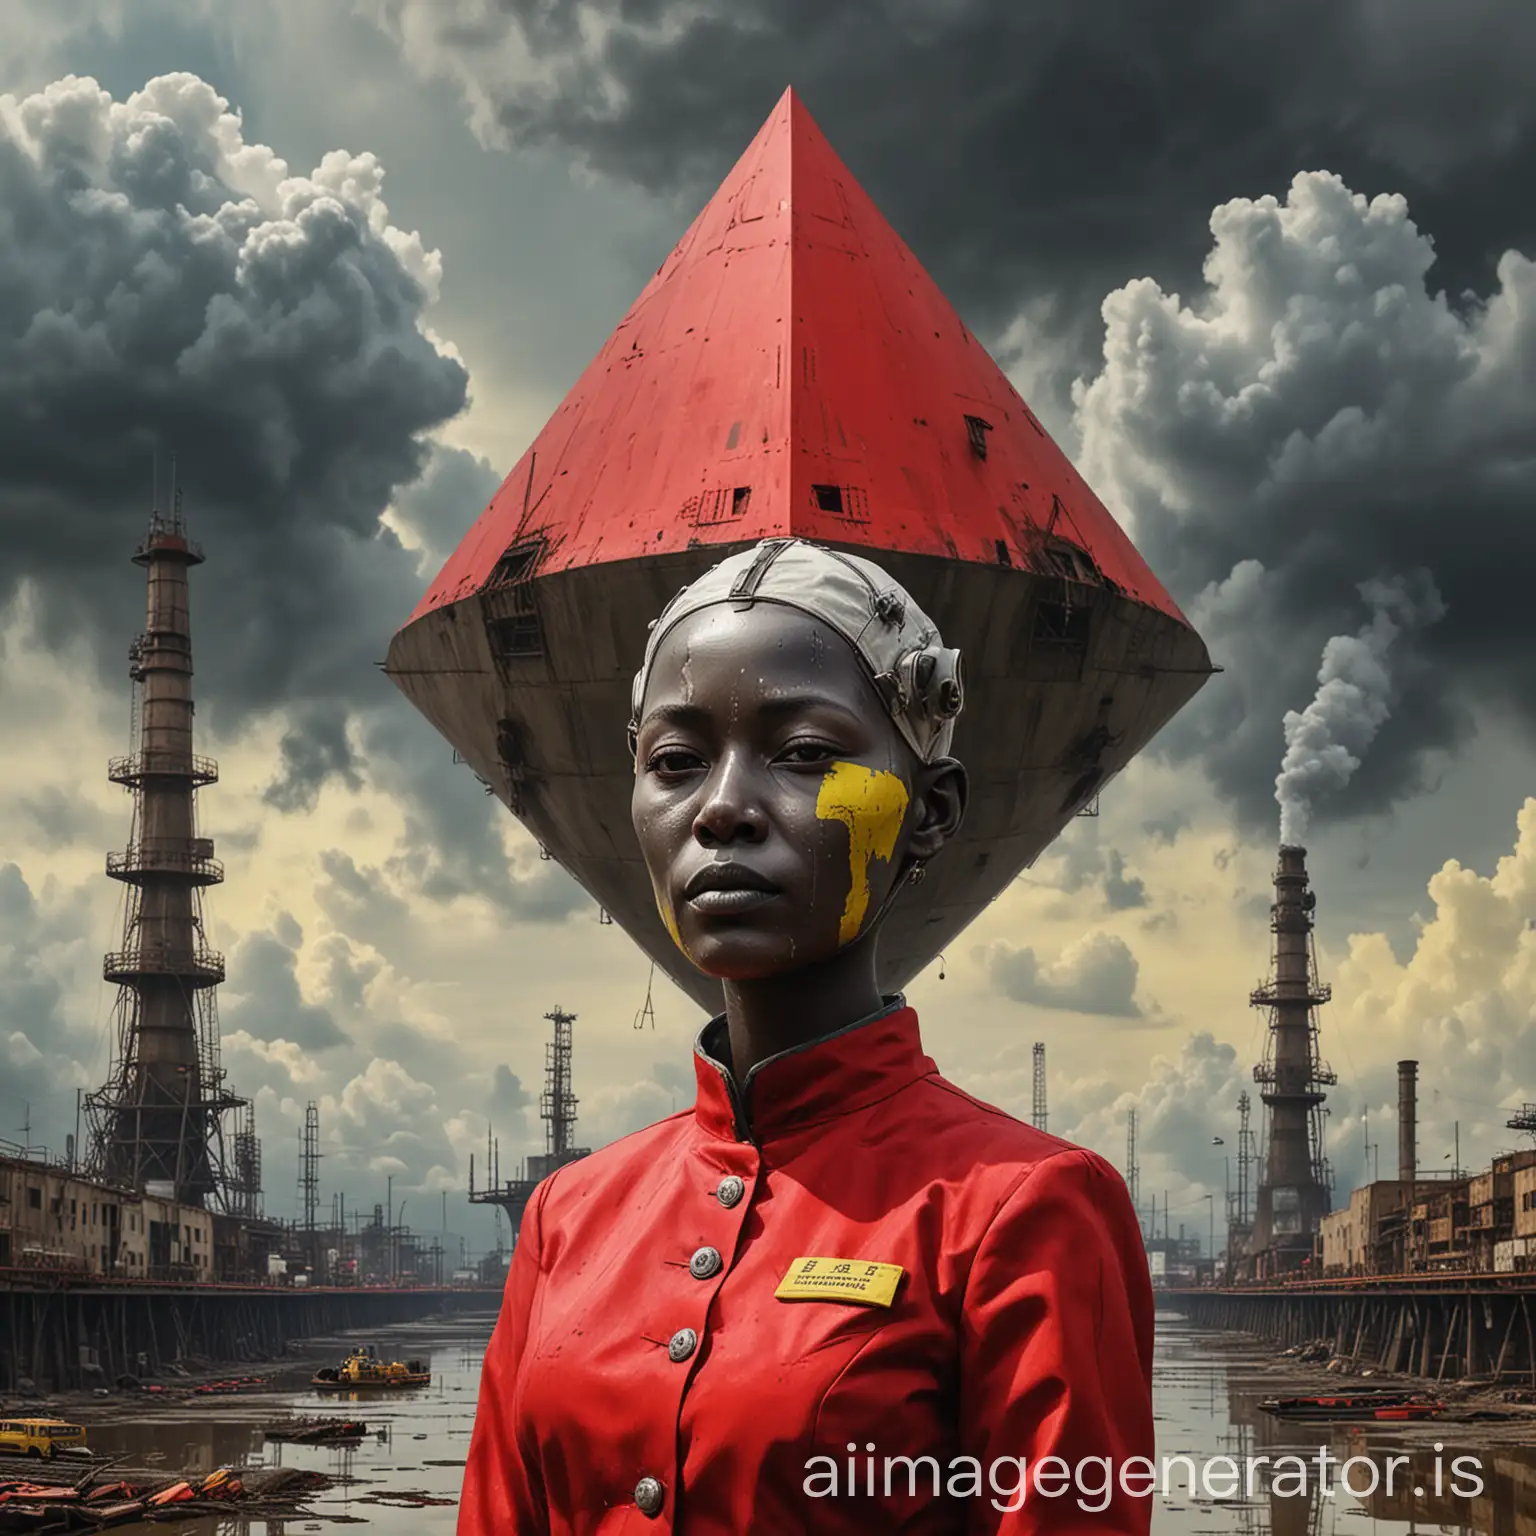 close-up of enslaved people's suits-submarines, concrete buildings, distillation petrochemical towers, square in a rhombus giant head of the supervisor in the sky, palette red and neon yellow, black clouds